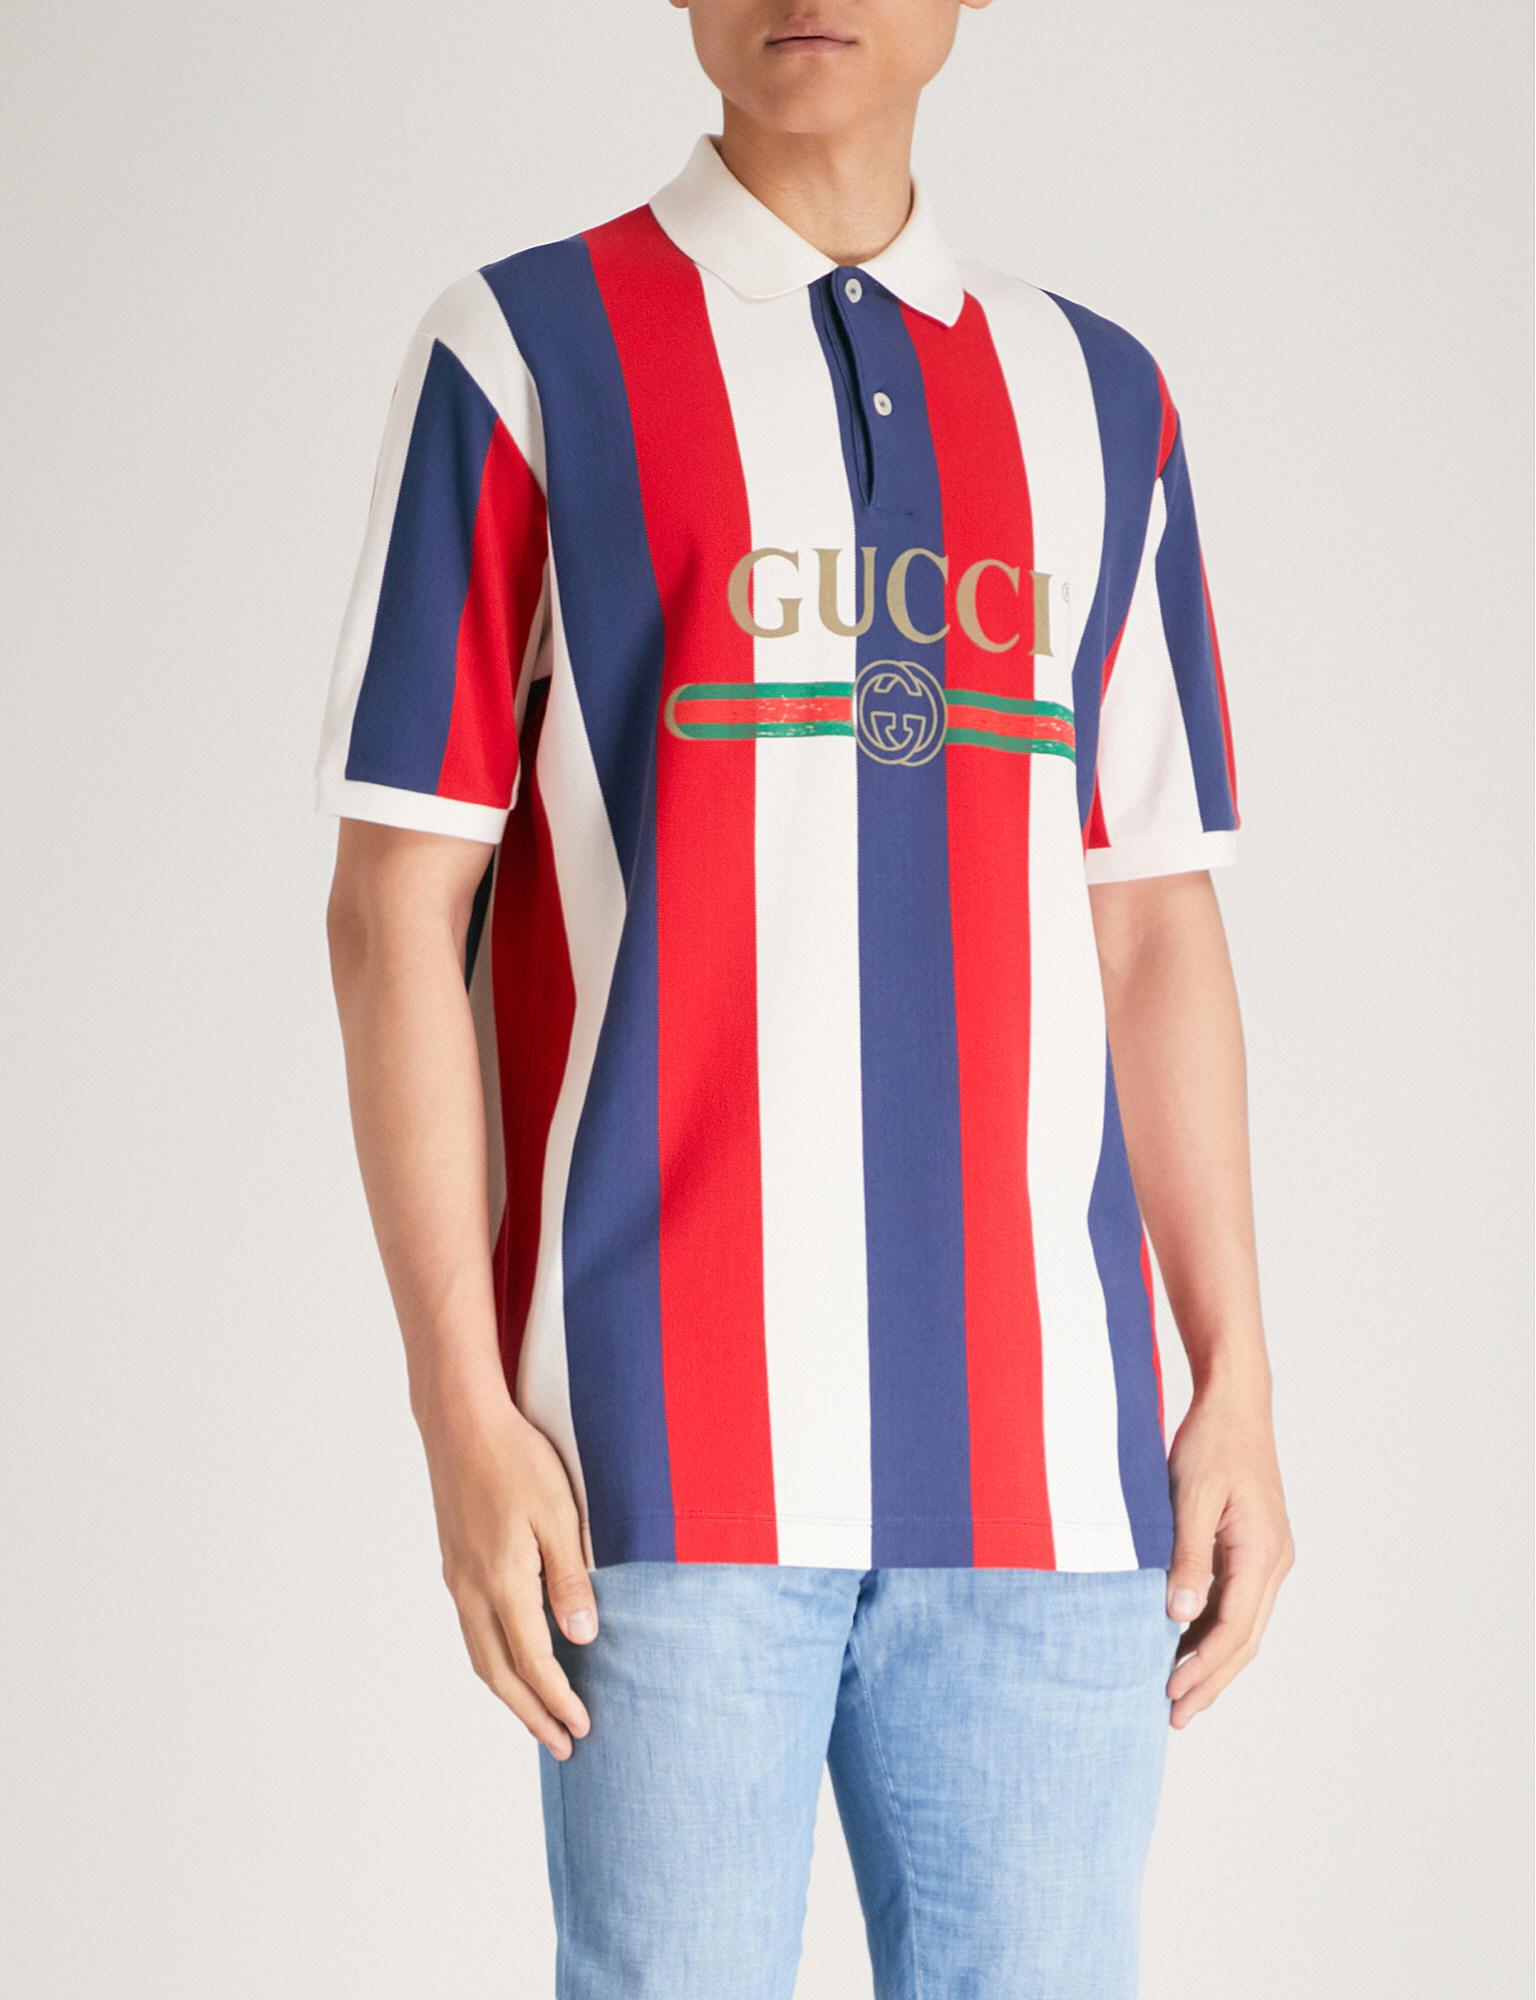 Gucci Baiadera Striped Cotton-piqué Polo Shirt in Blue Red White (Red) for  Men - Lyst